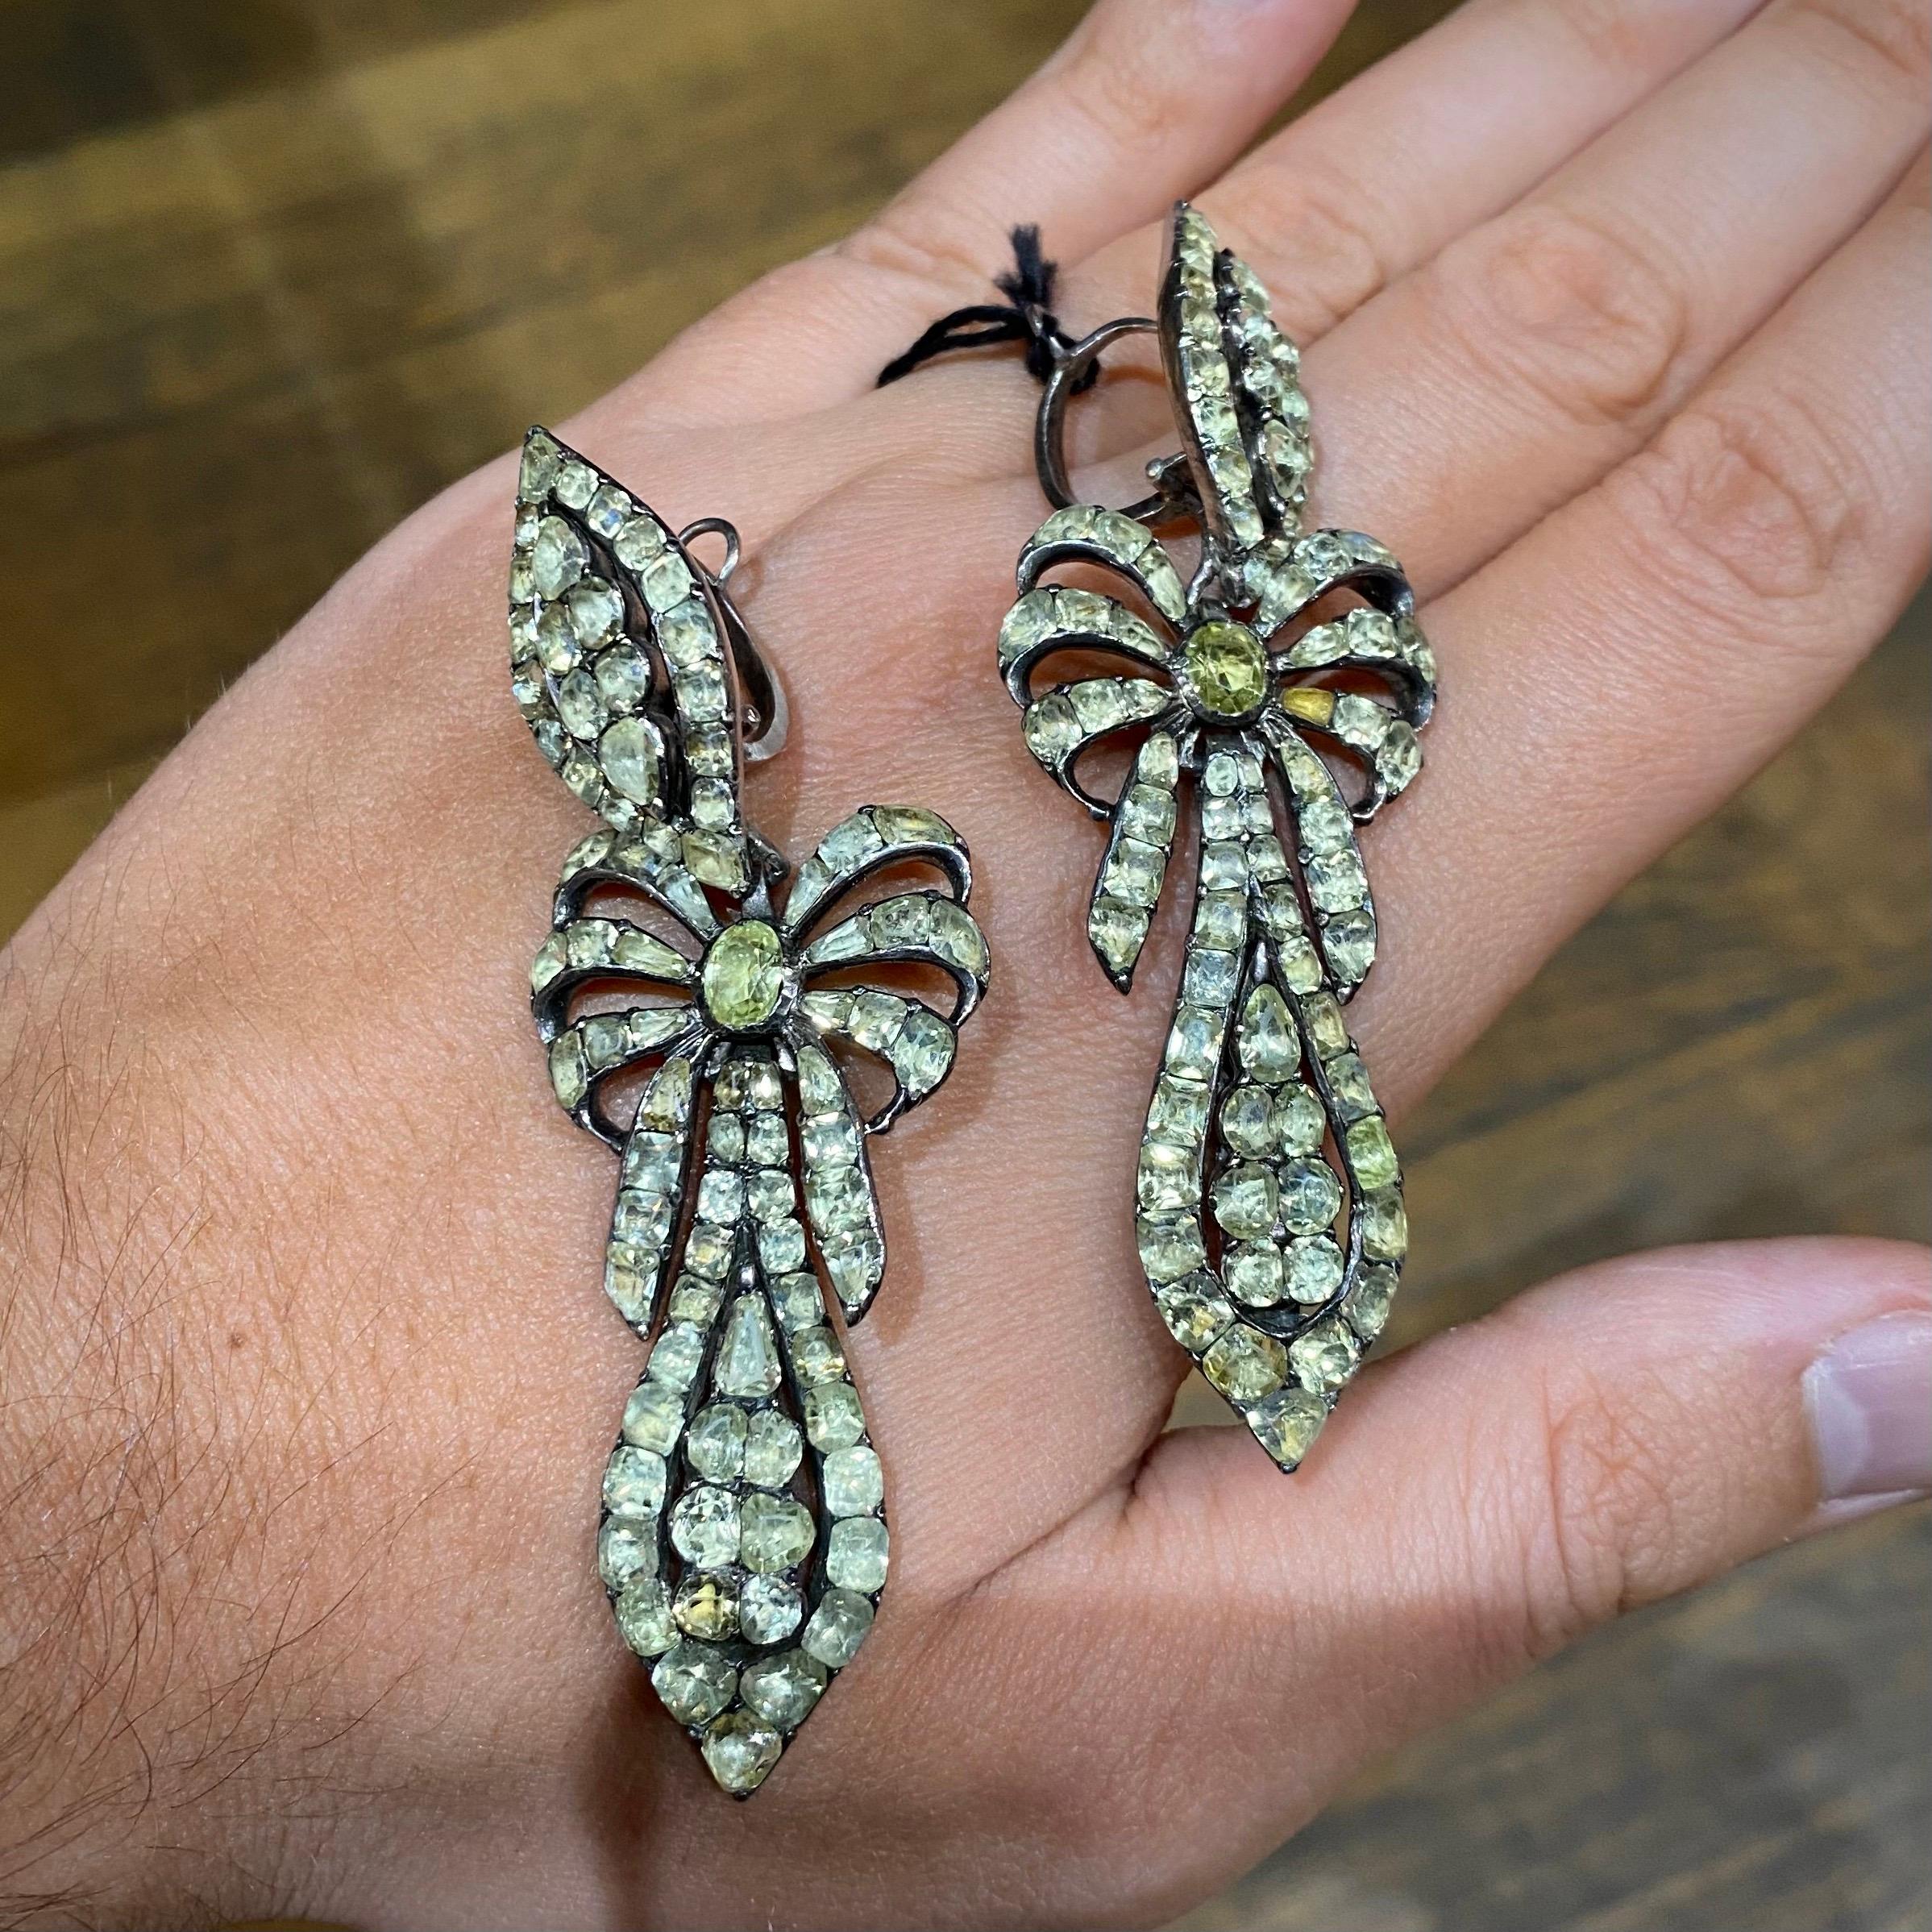 Antique 18th Century Chrysolite Chrysoberyl Pendant Earrings Portuguese 1770s In Good Condition For Sale In Lisbon, PT